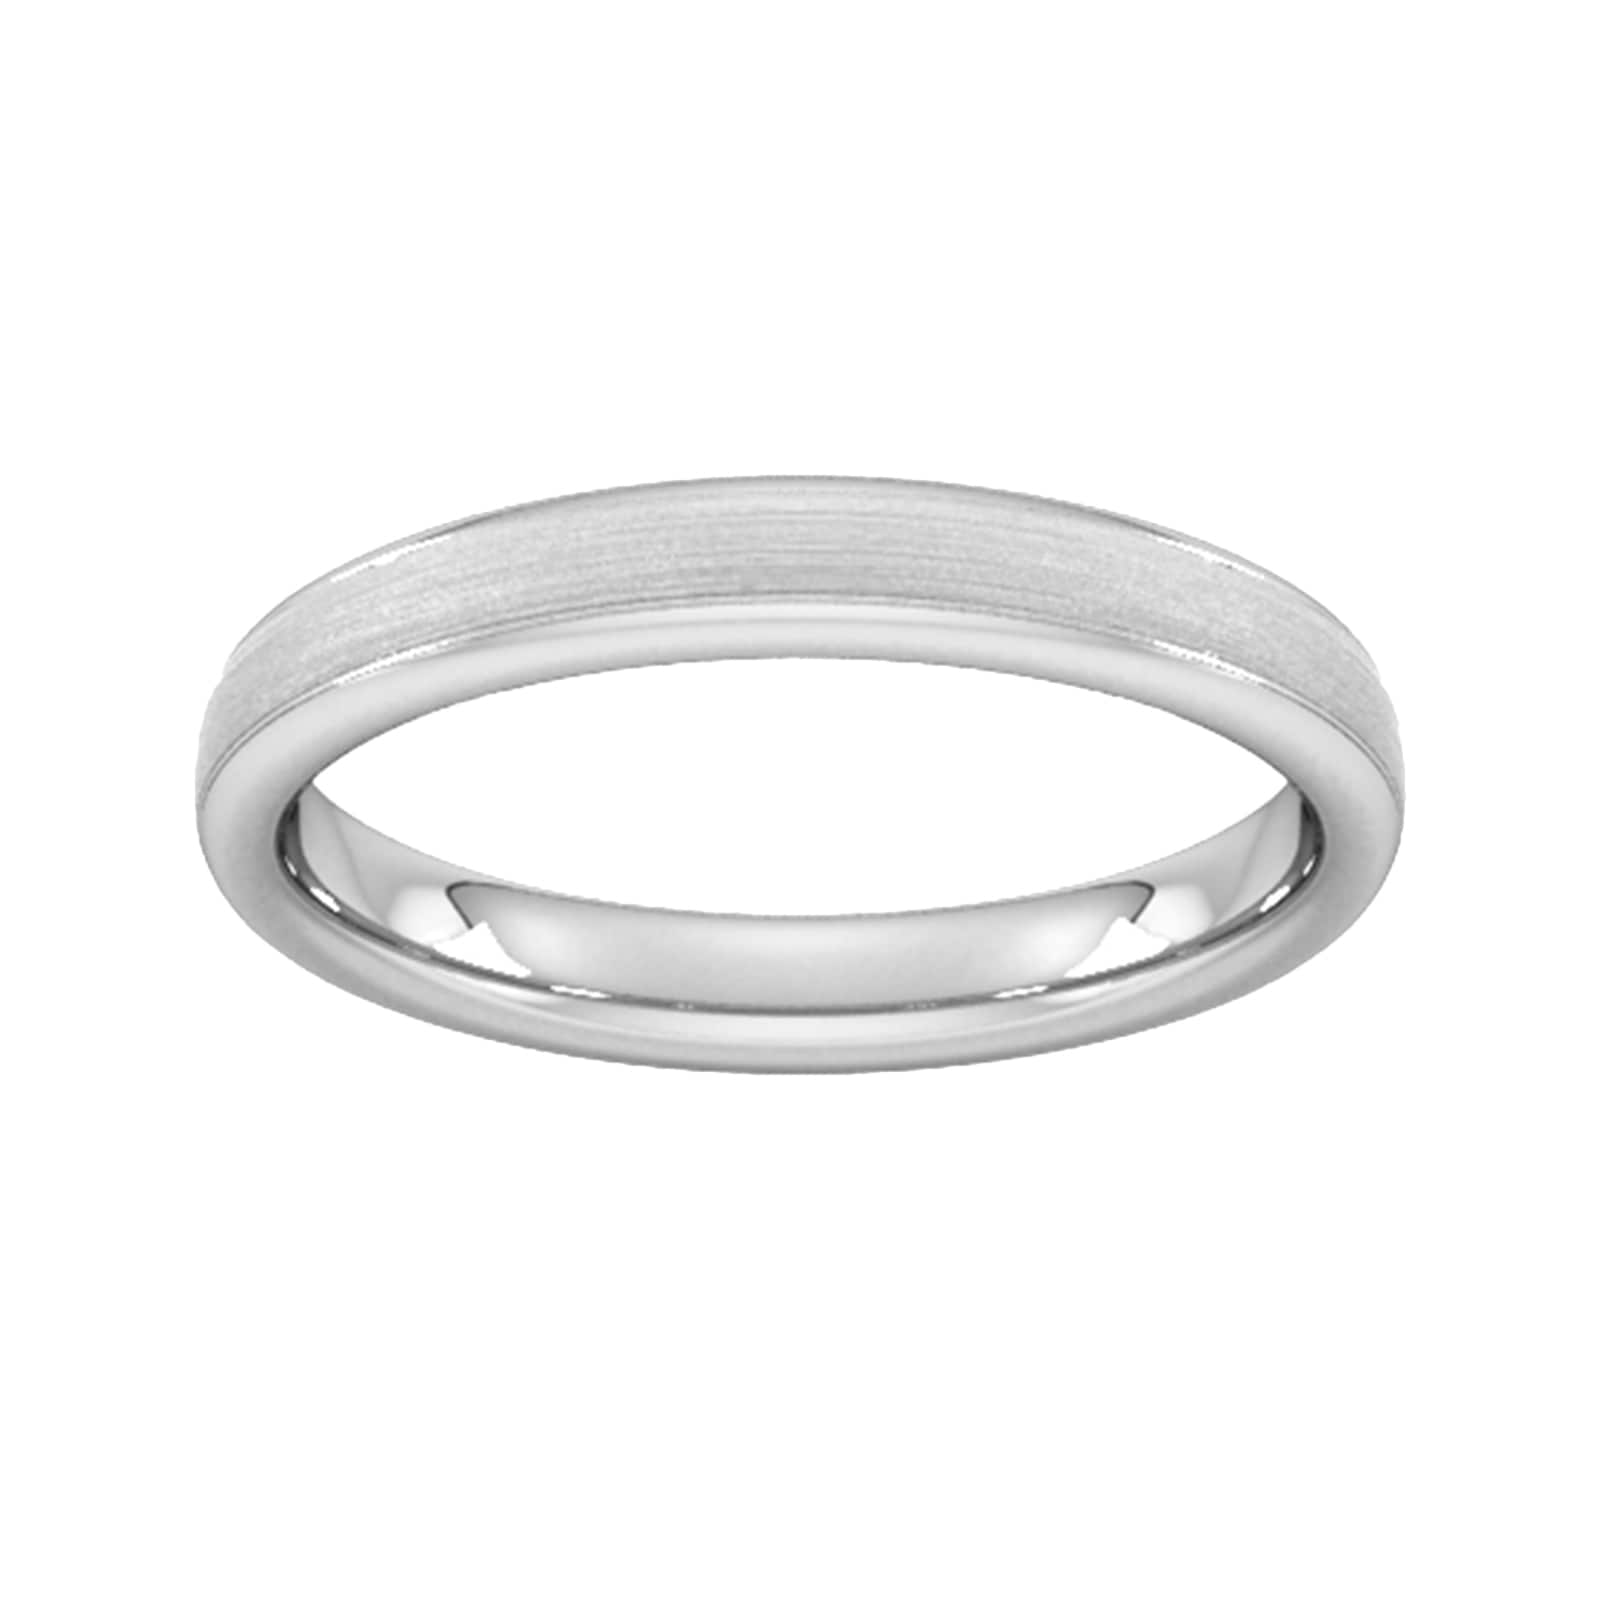 3mm D Shape Standard Matt Centre With Grooves Wedding Ring In 18 Carat White Gold - Ring Size Q